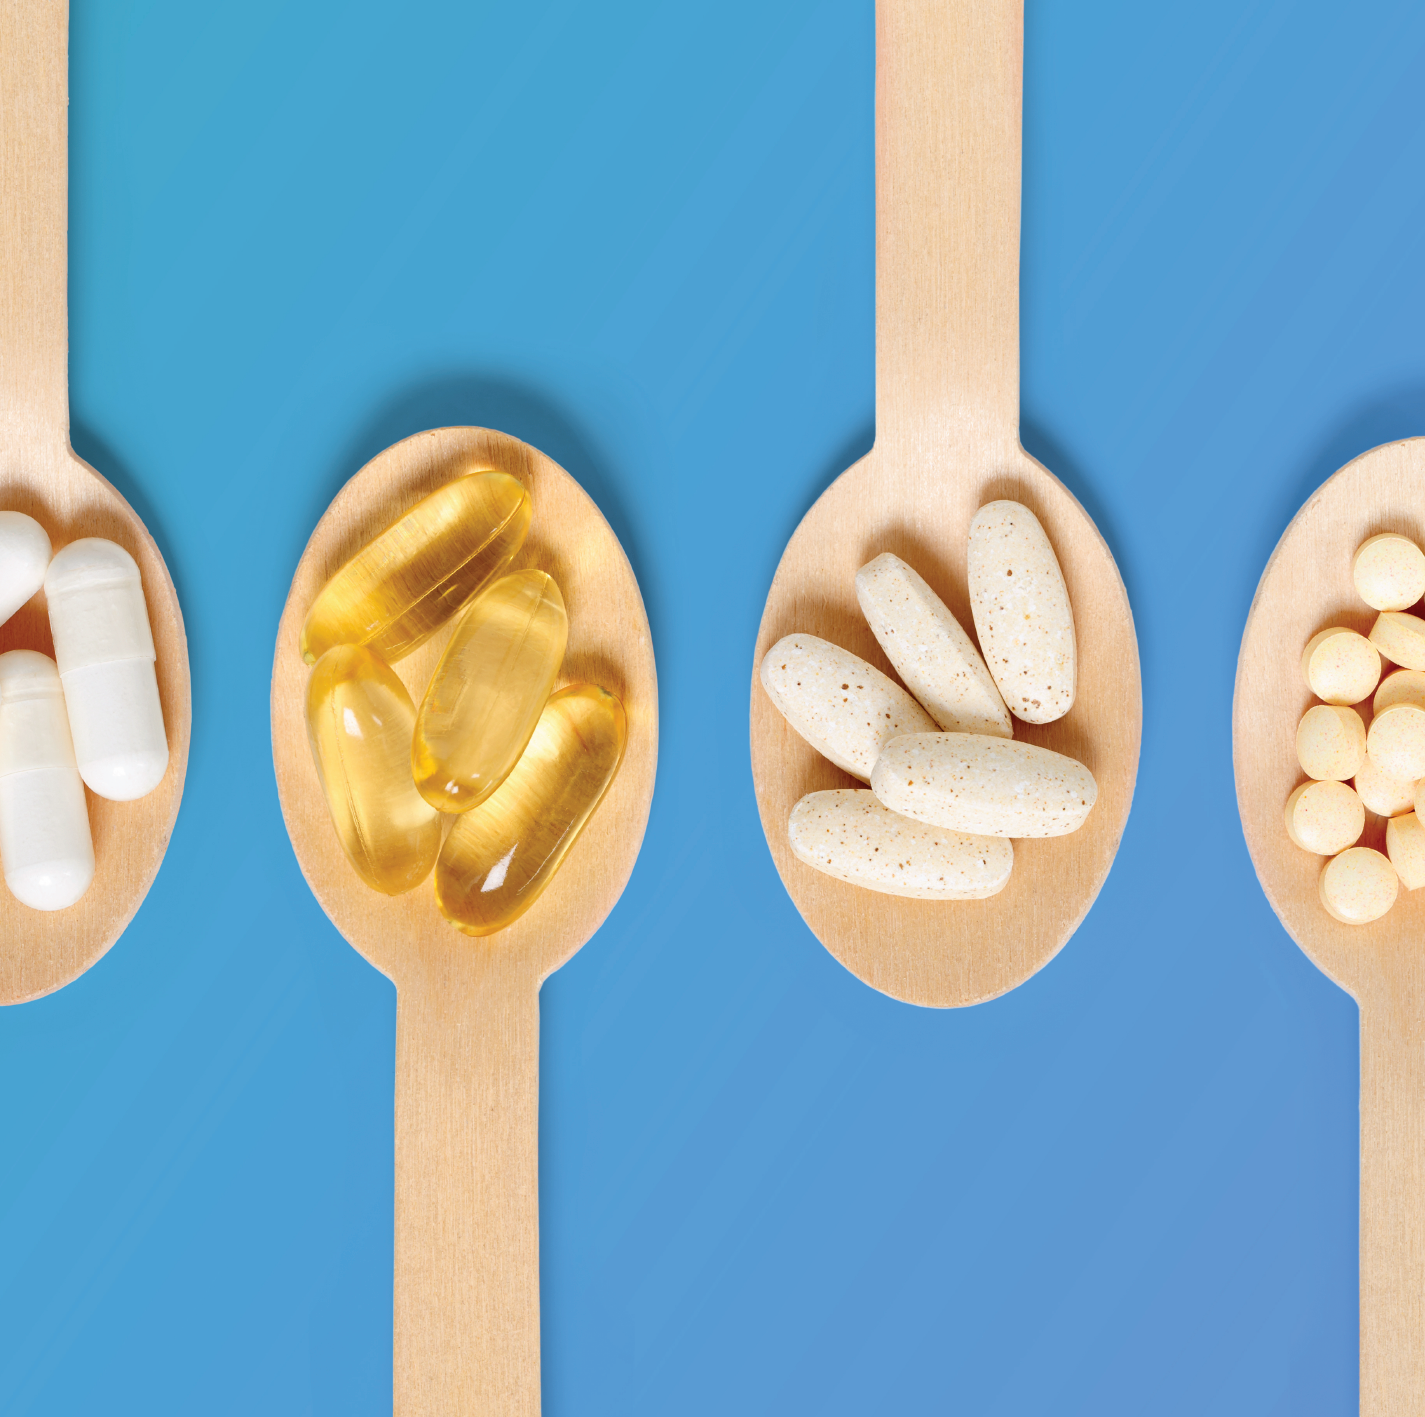 How to Tell if a Supplement Will Work